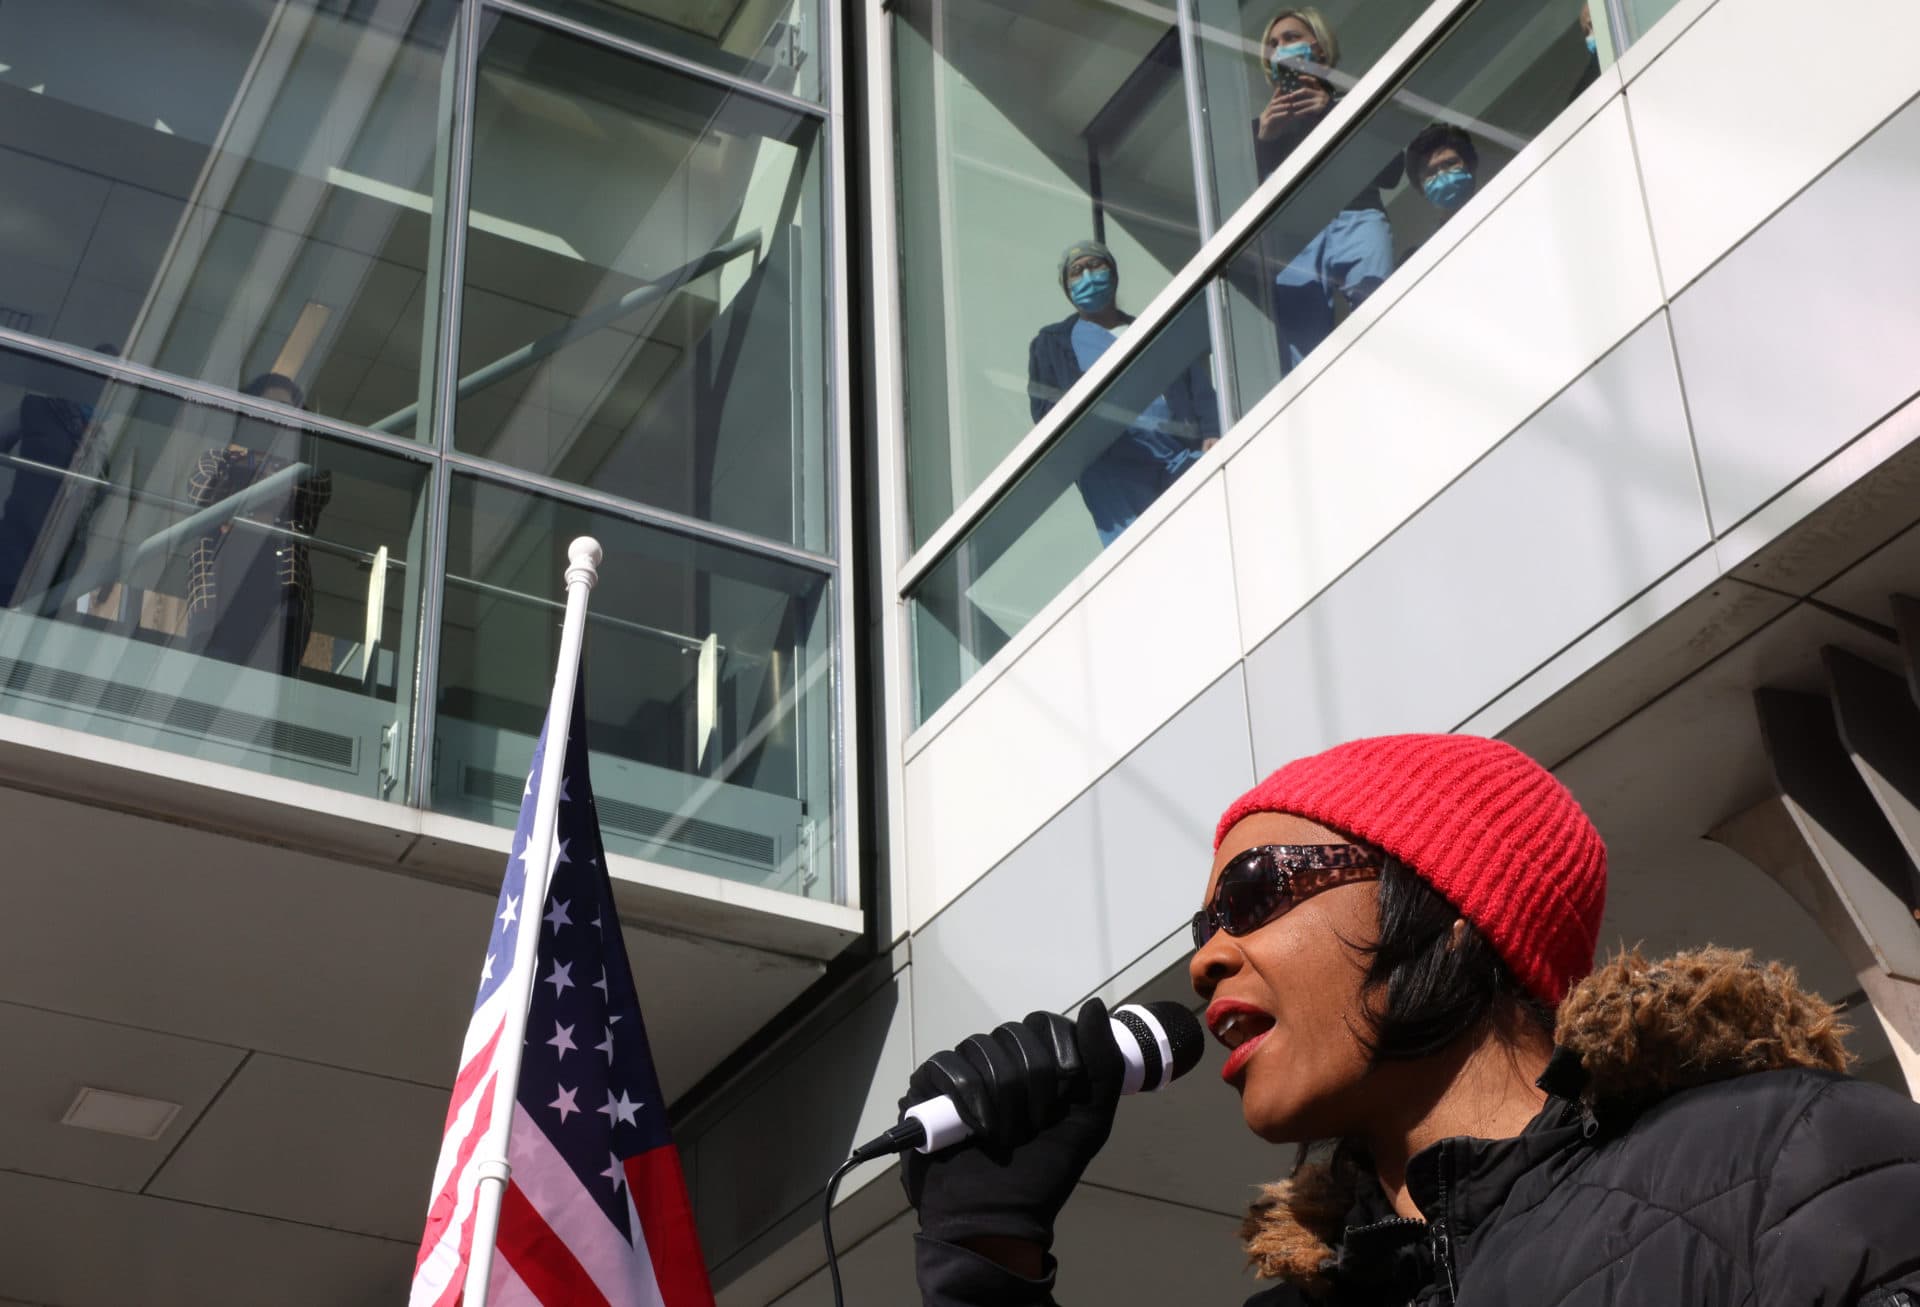 Rayla Campbell leads protesters in chants such as My Body, My Choice as they gather outside of Brigham and Women's Hospital in Boston on Feb. 6, 2022. (Jessica Rinaldi/The Boston Globe via Getty Images)